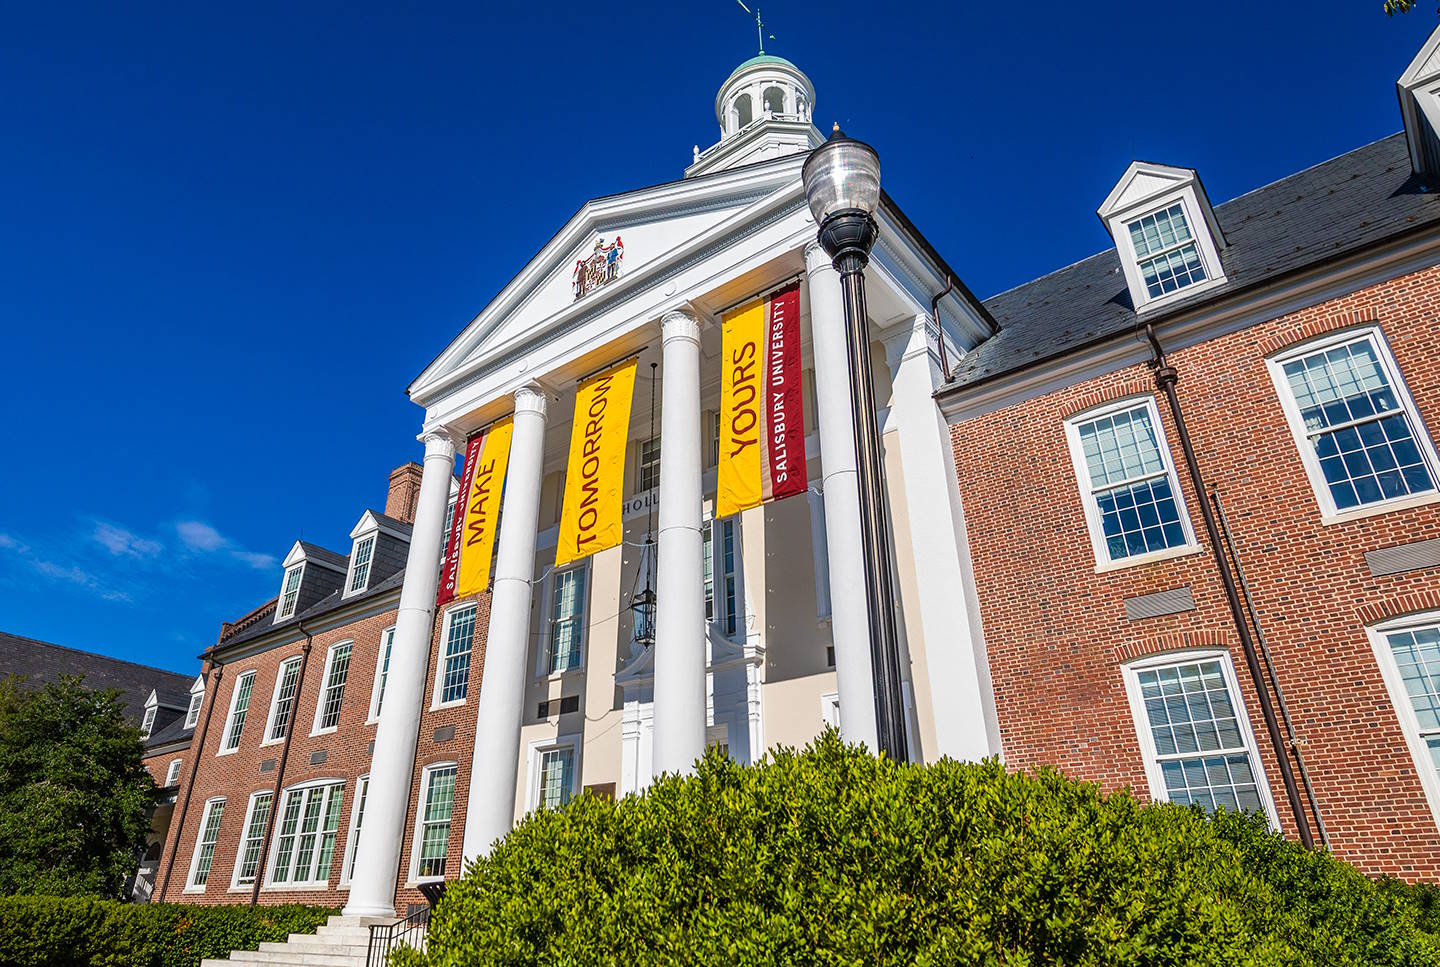 Holloway Hall with Banners